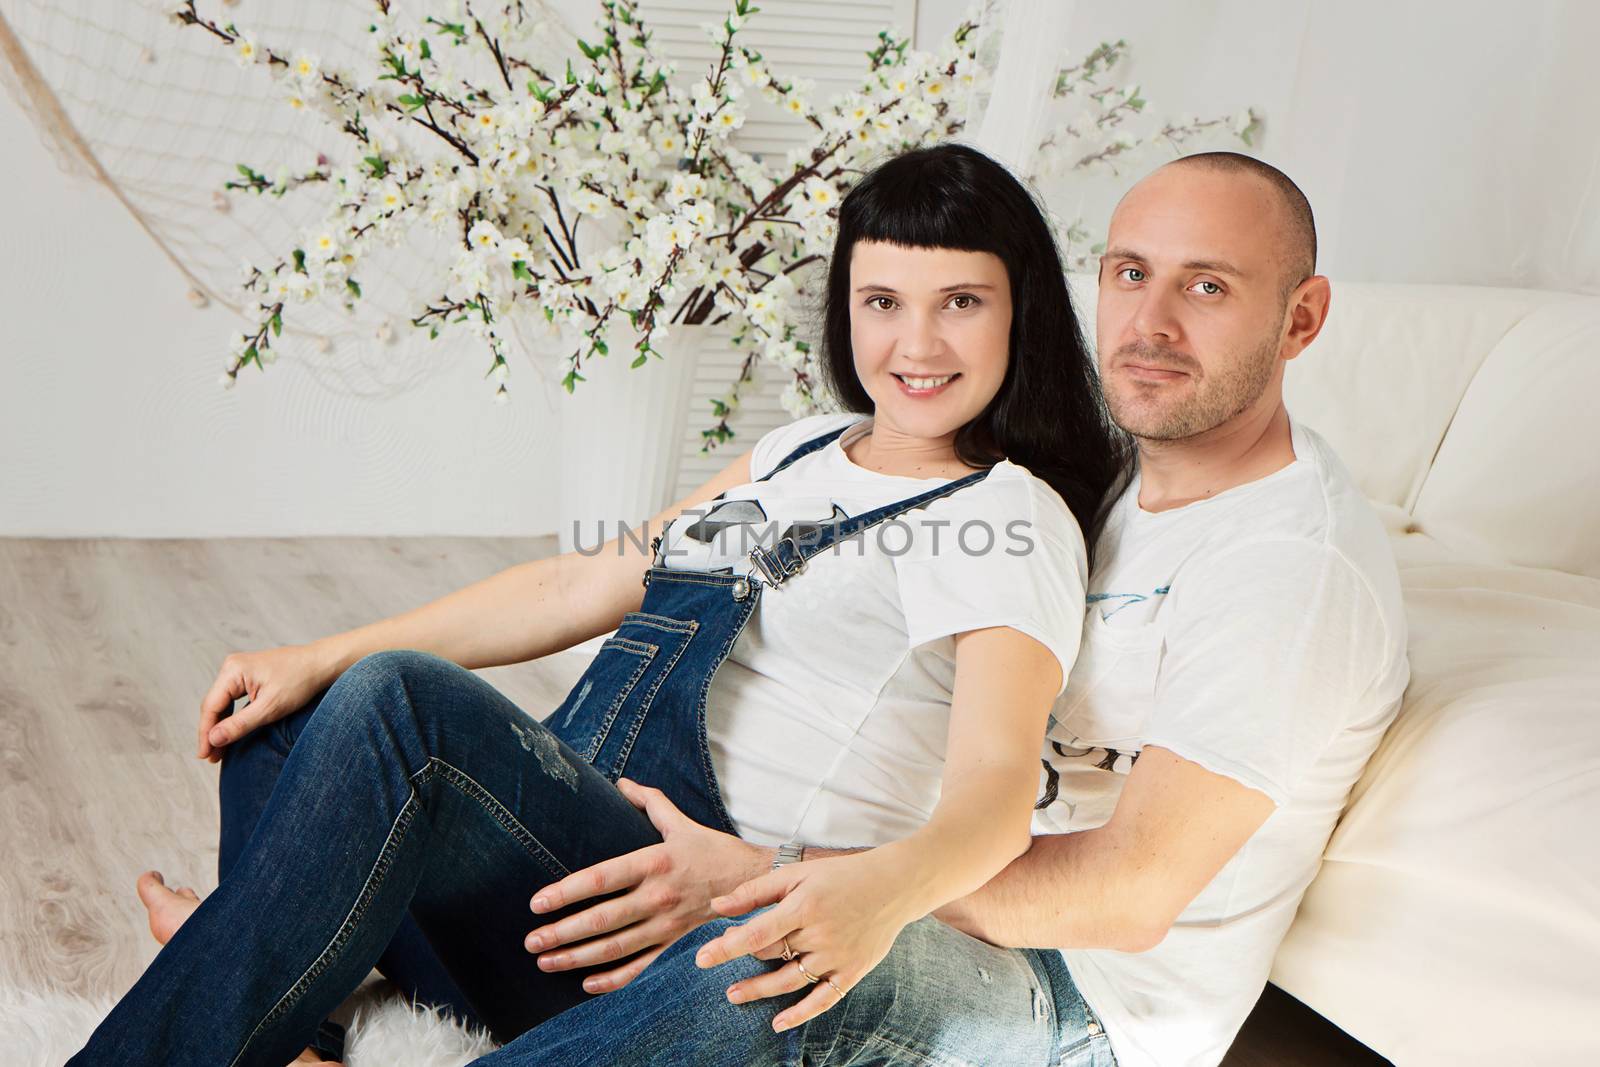 Pregnant woman with her loving husband in a happy anticipation of the baby